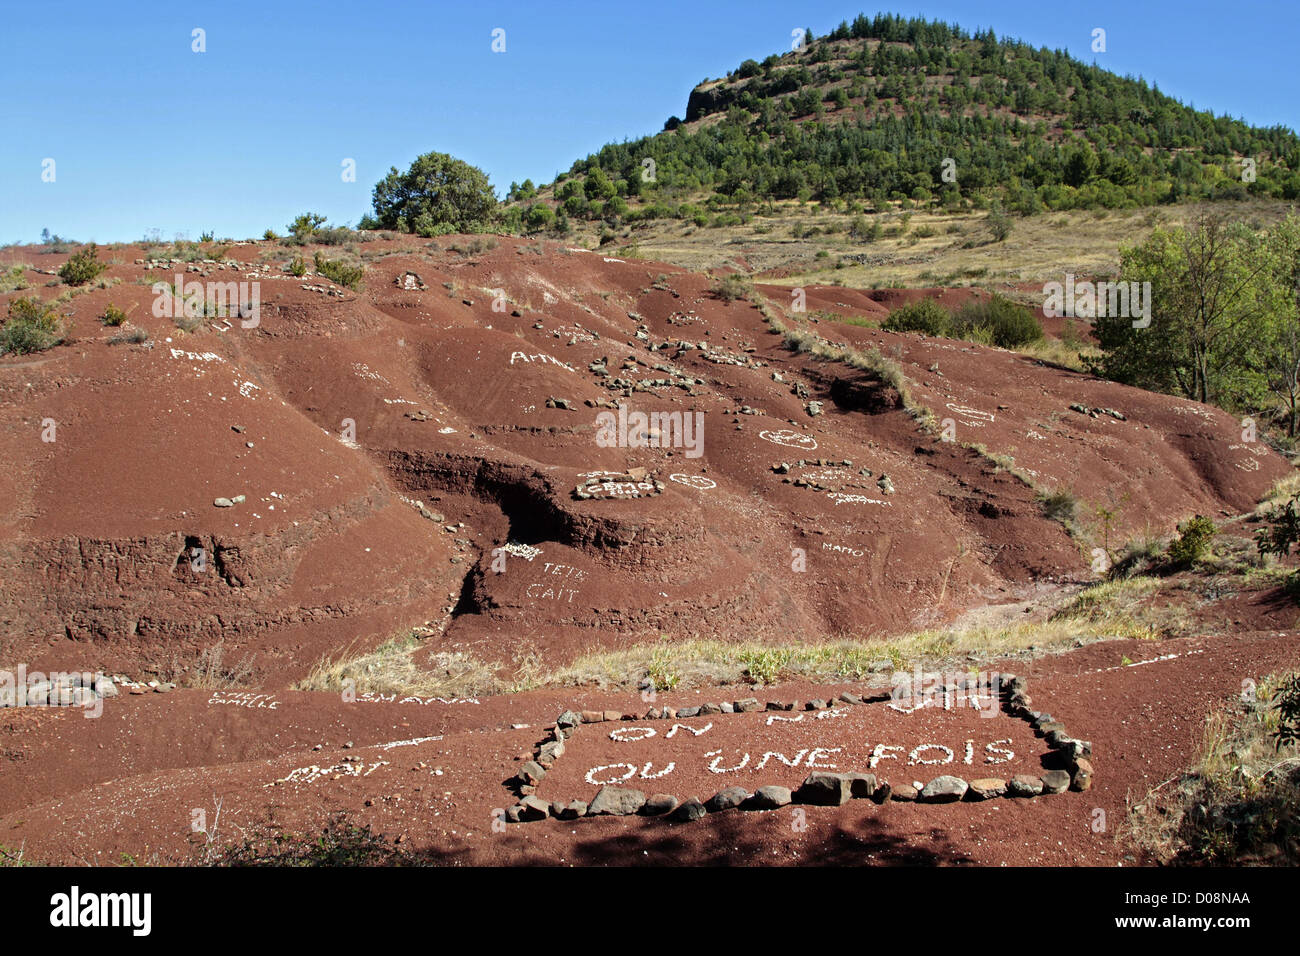 INSCRIPTION OF WHITE STONES WE ONLY LIVE ONCE ON THE RED CLAY RICH IN IRON OXIDE THE RED EARTH NEAR LAKE SALAGOU HERAULT (34) Stock Photo